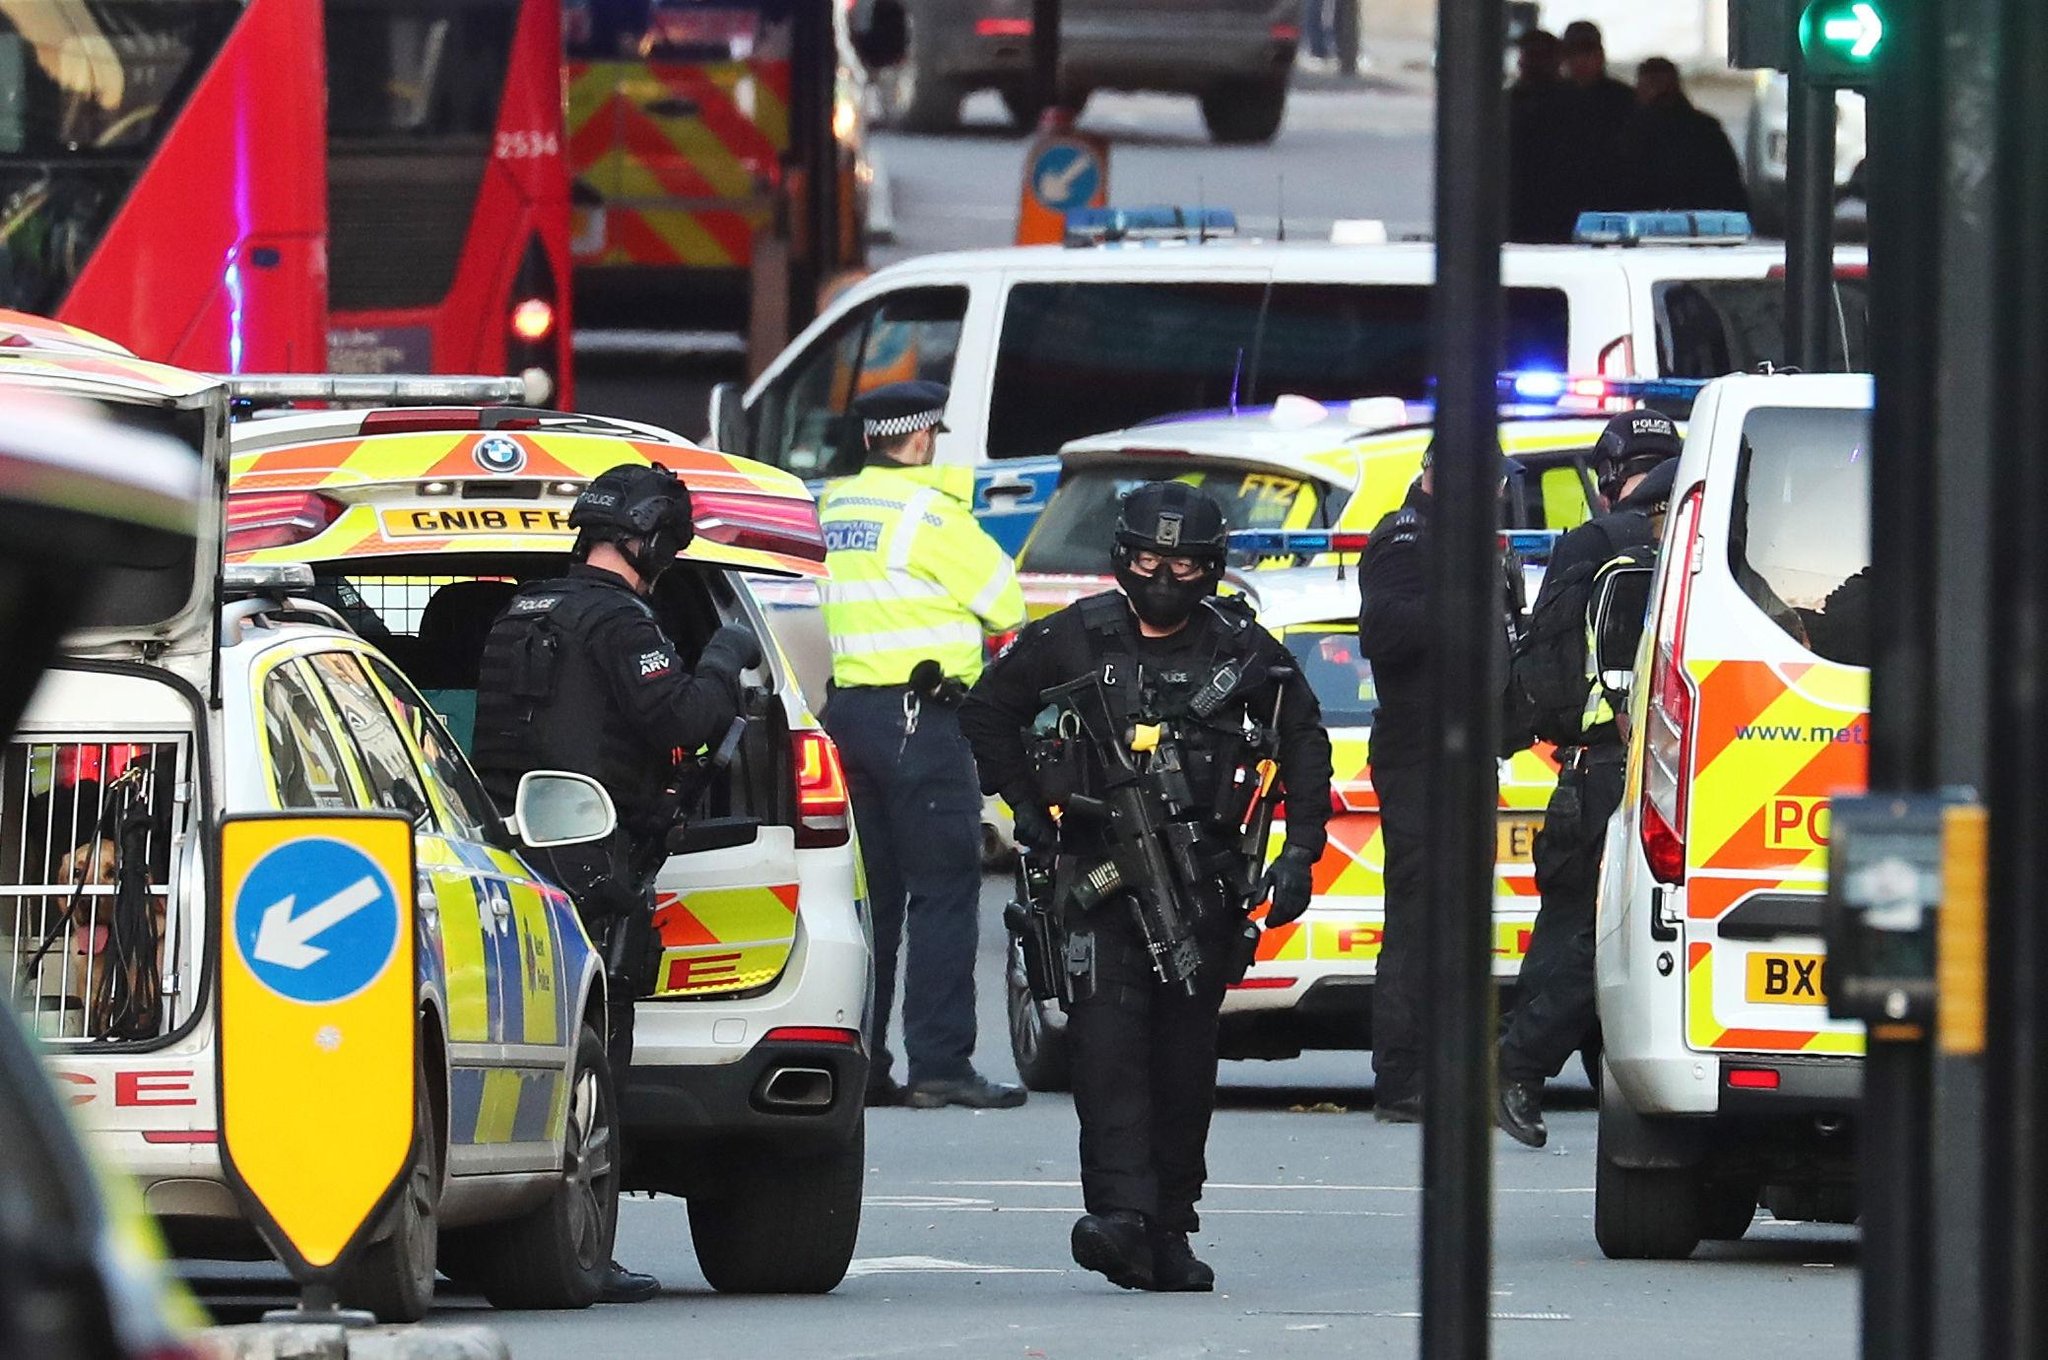 Counter terrorism in UK ـ Firefighters have agreed to assist police in future terrorist attacks